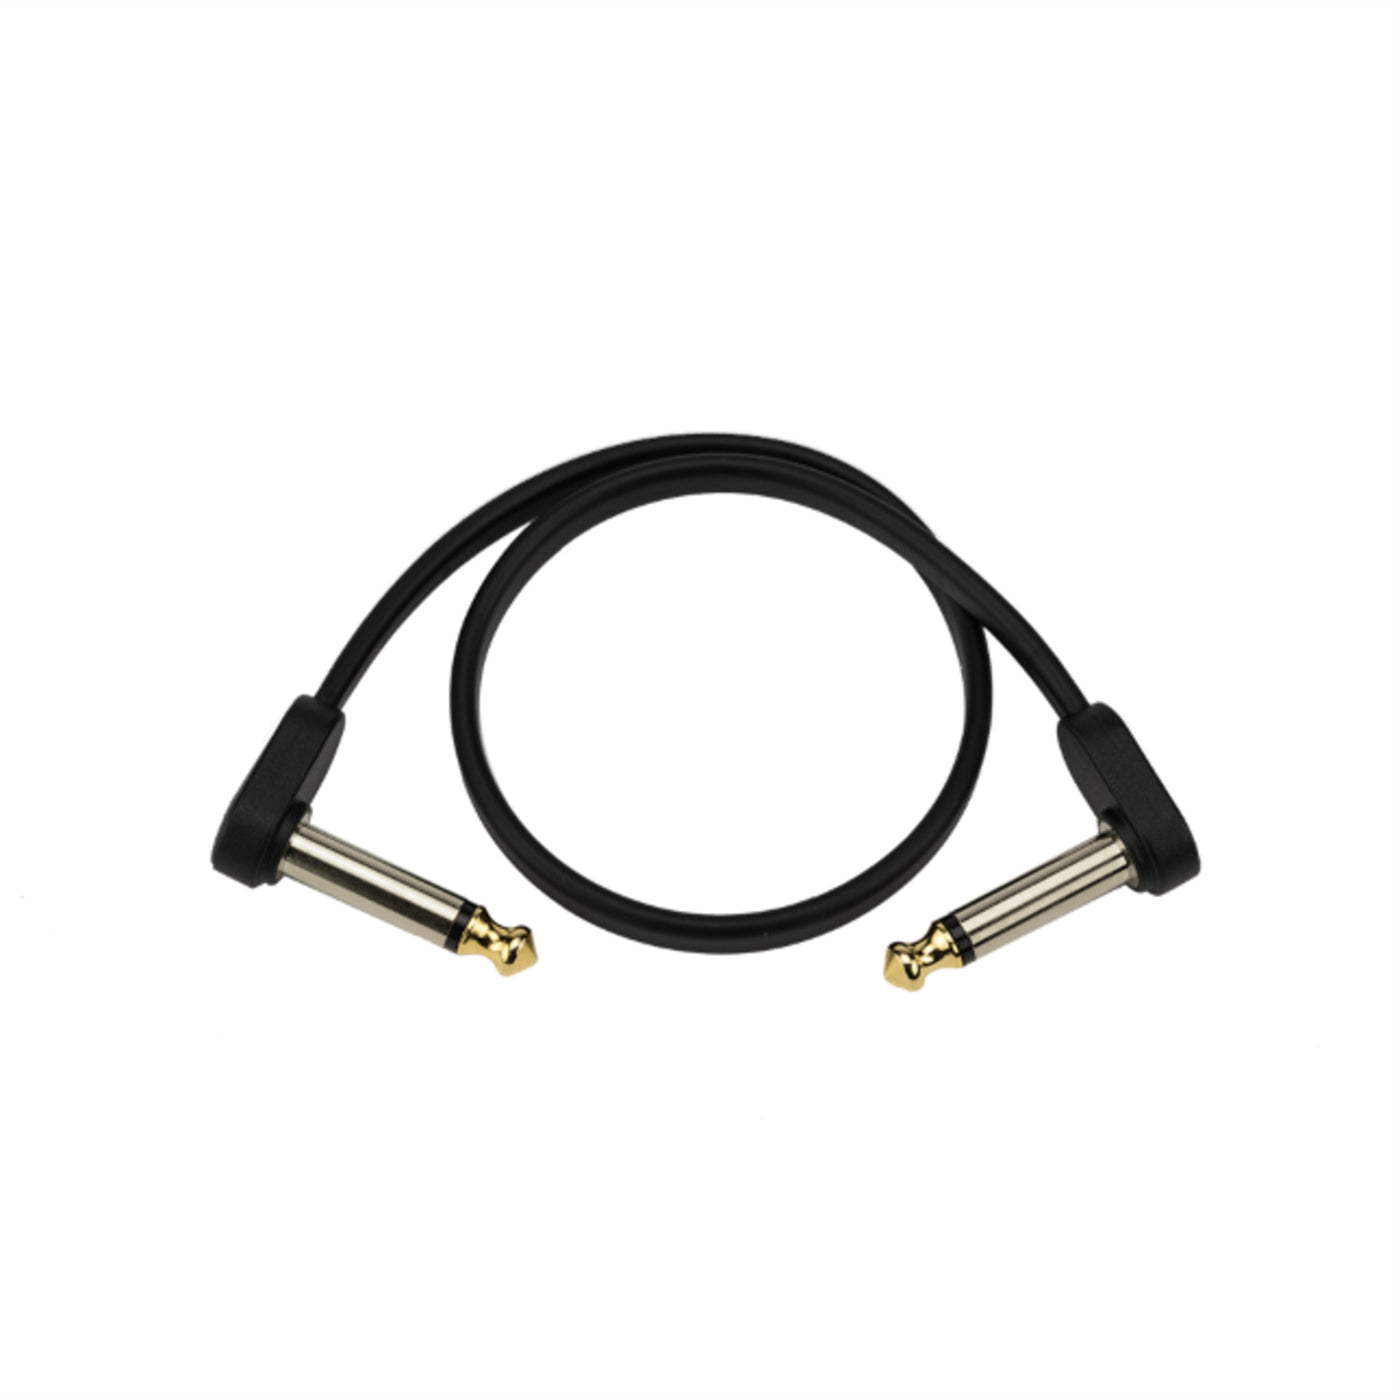 D'Addario Flat Patch Cable, 1-Foot Right Angle, Single Pack (PW-FPRR-01)